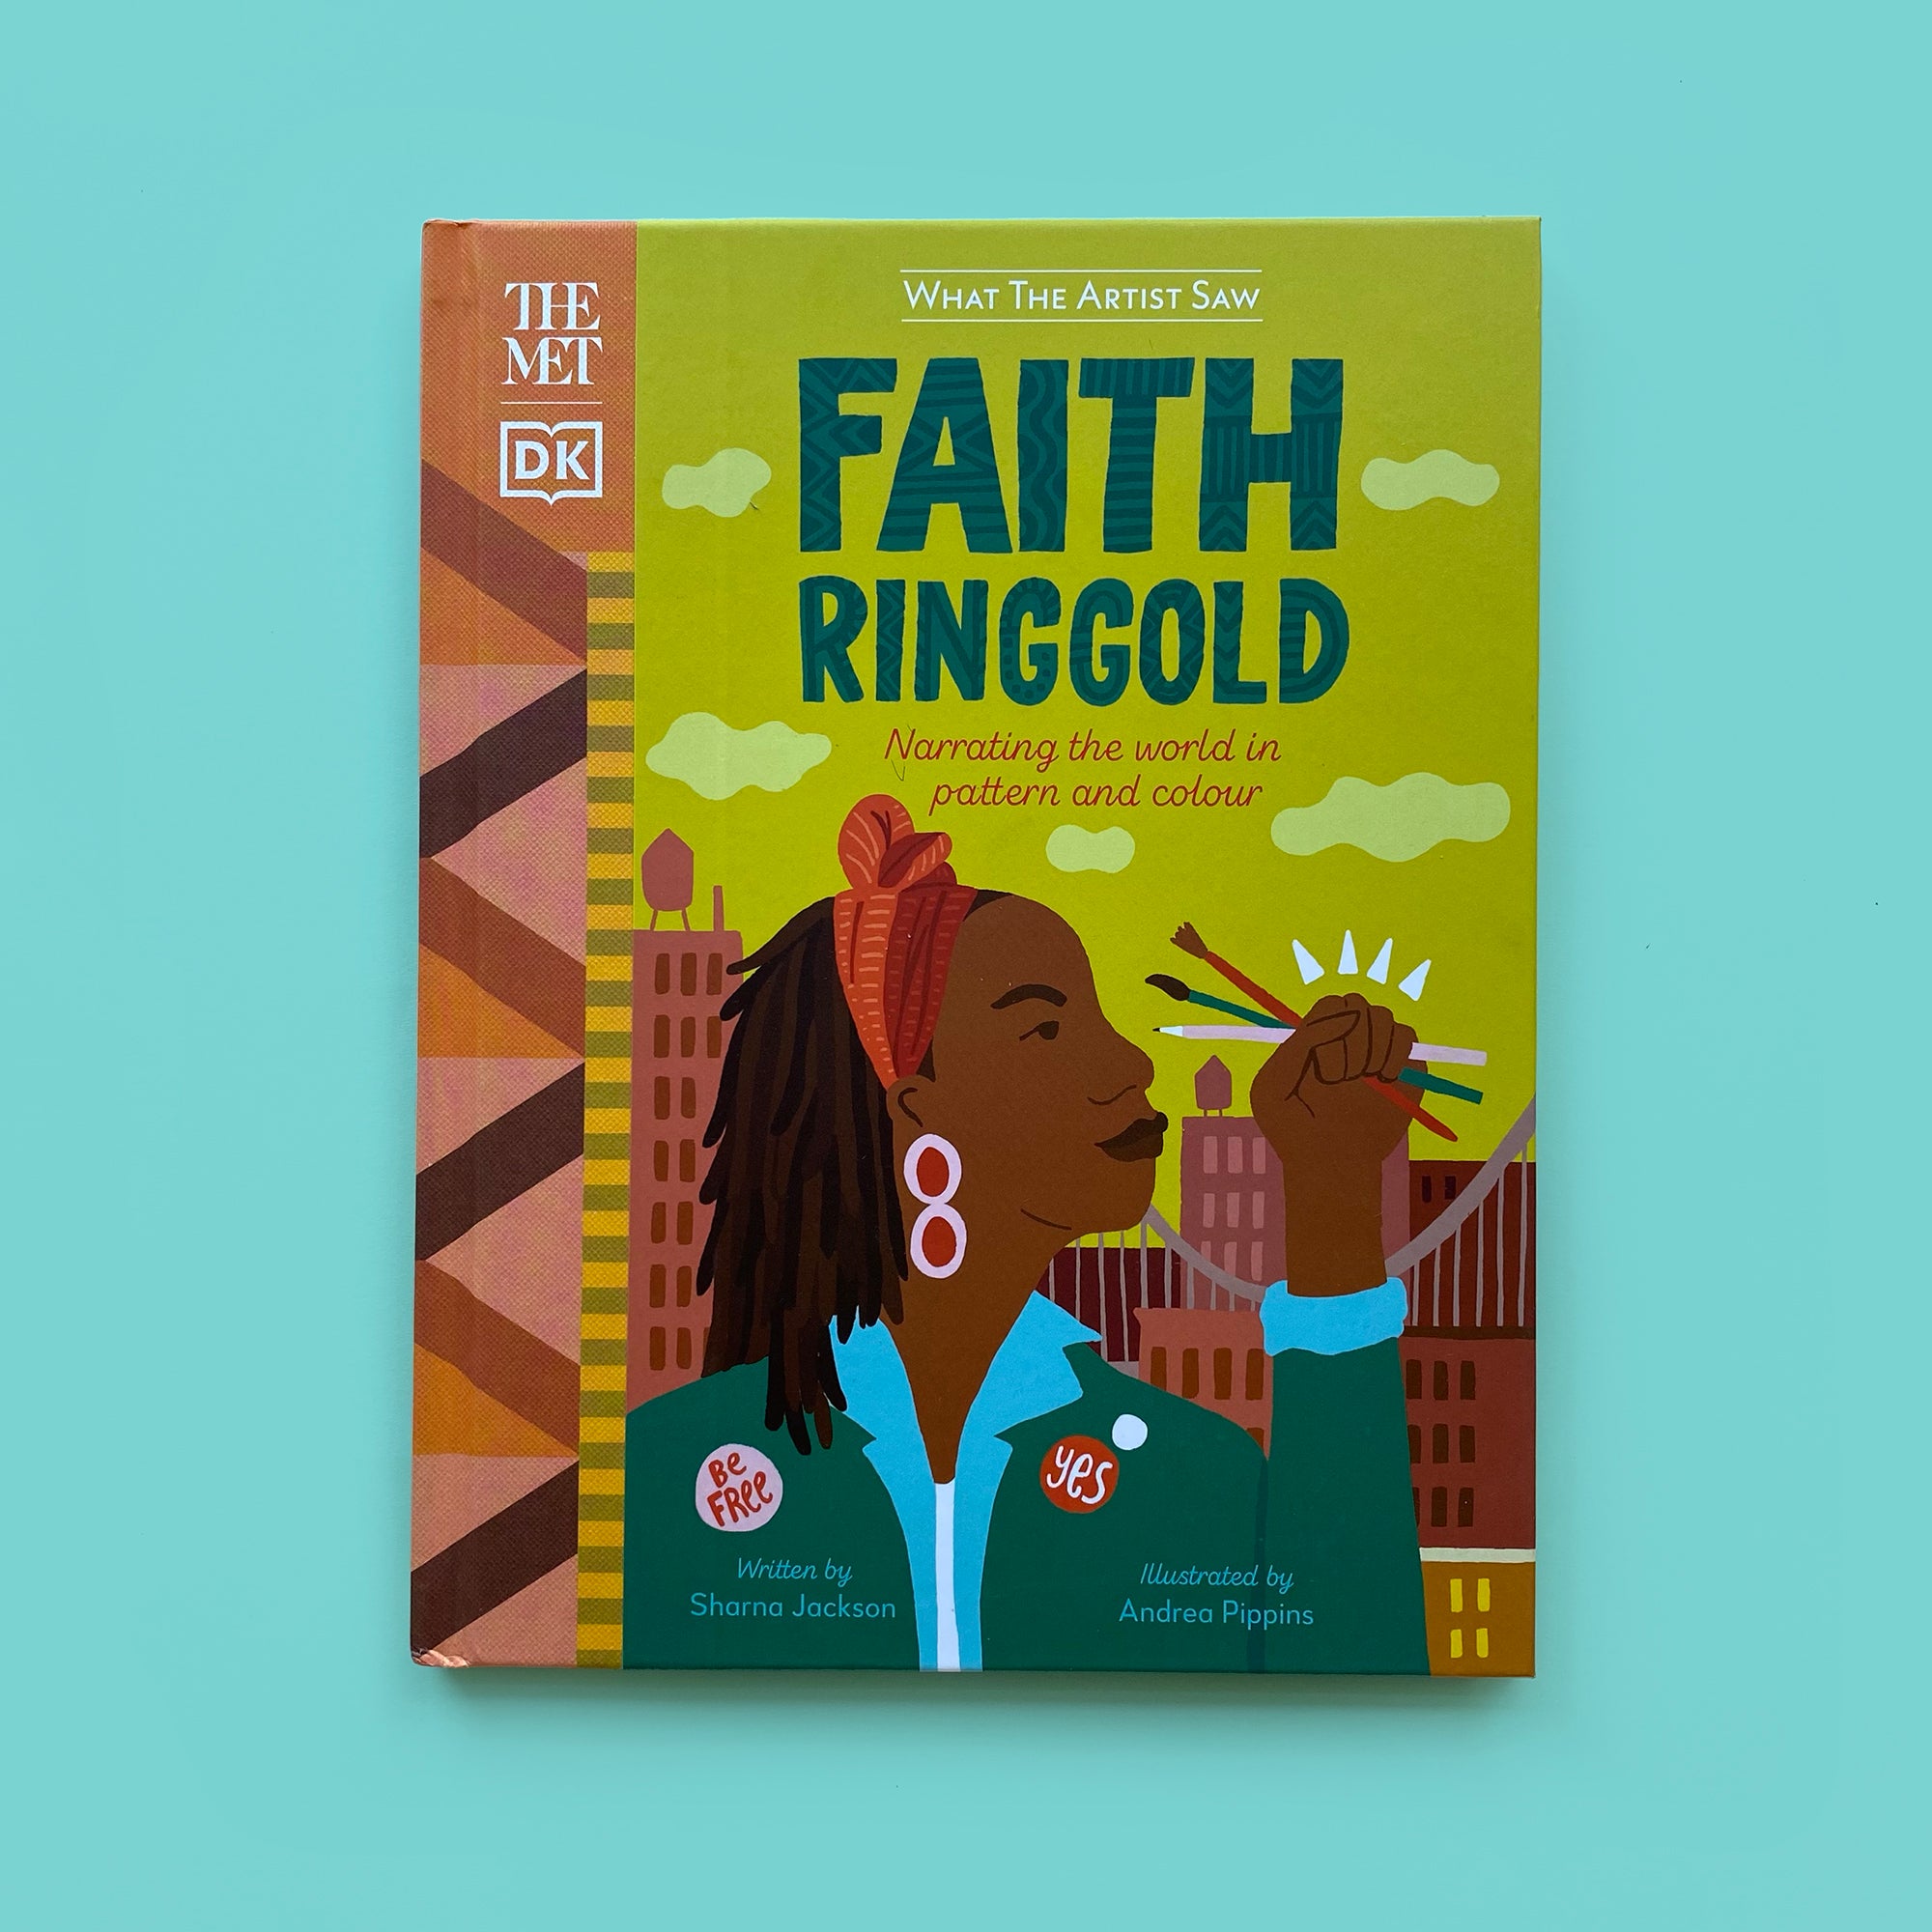 The MET - Faith Ringgold - 5% OFF